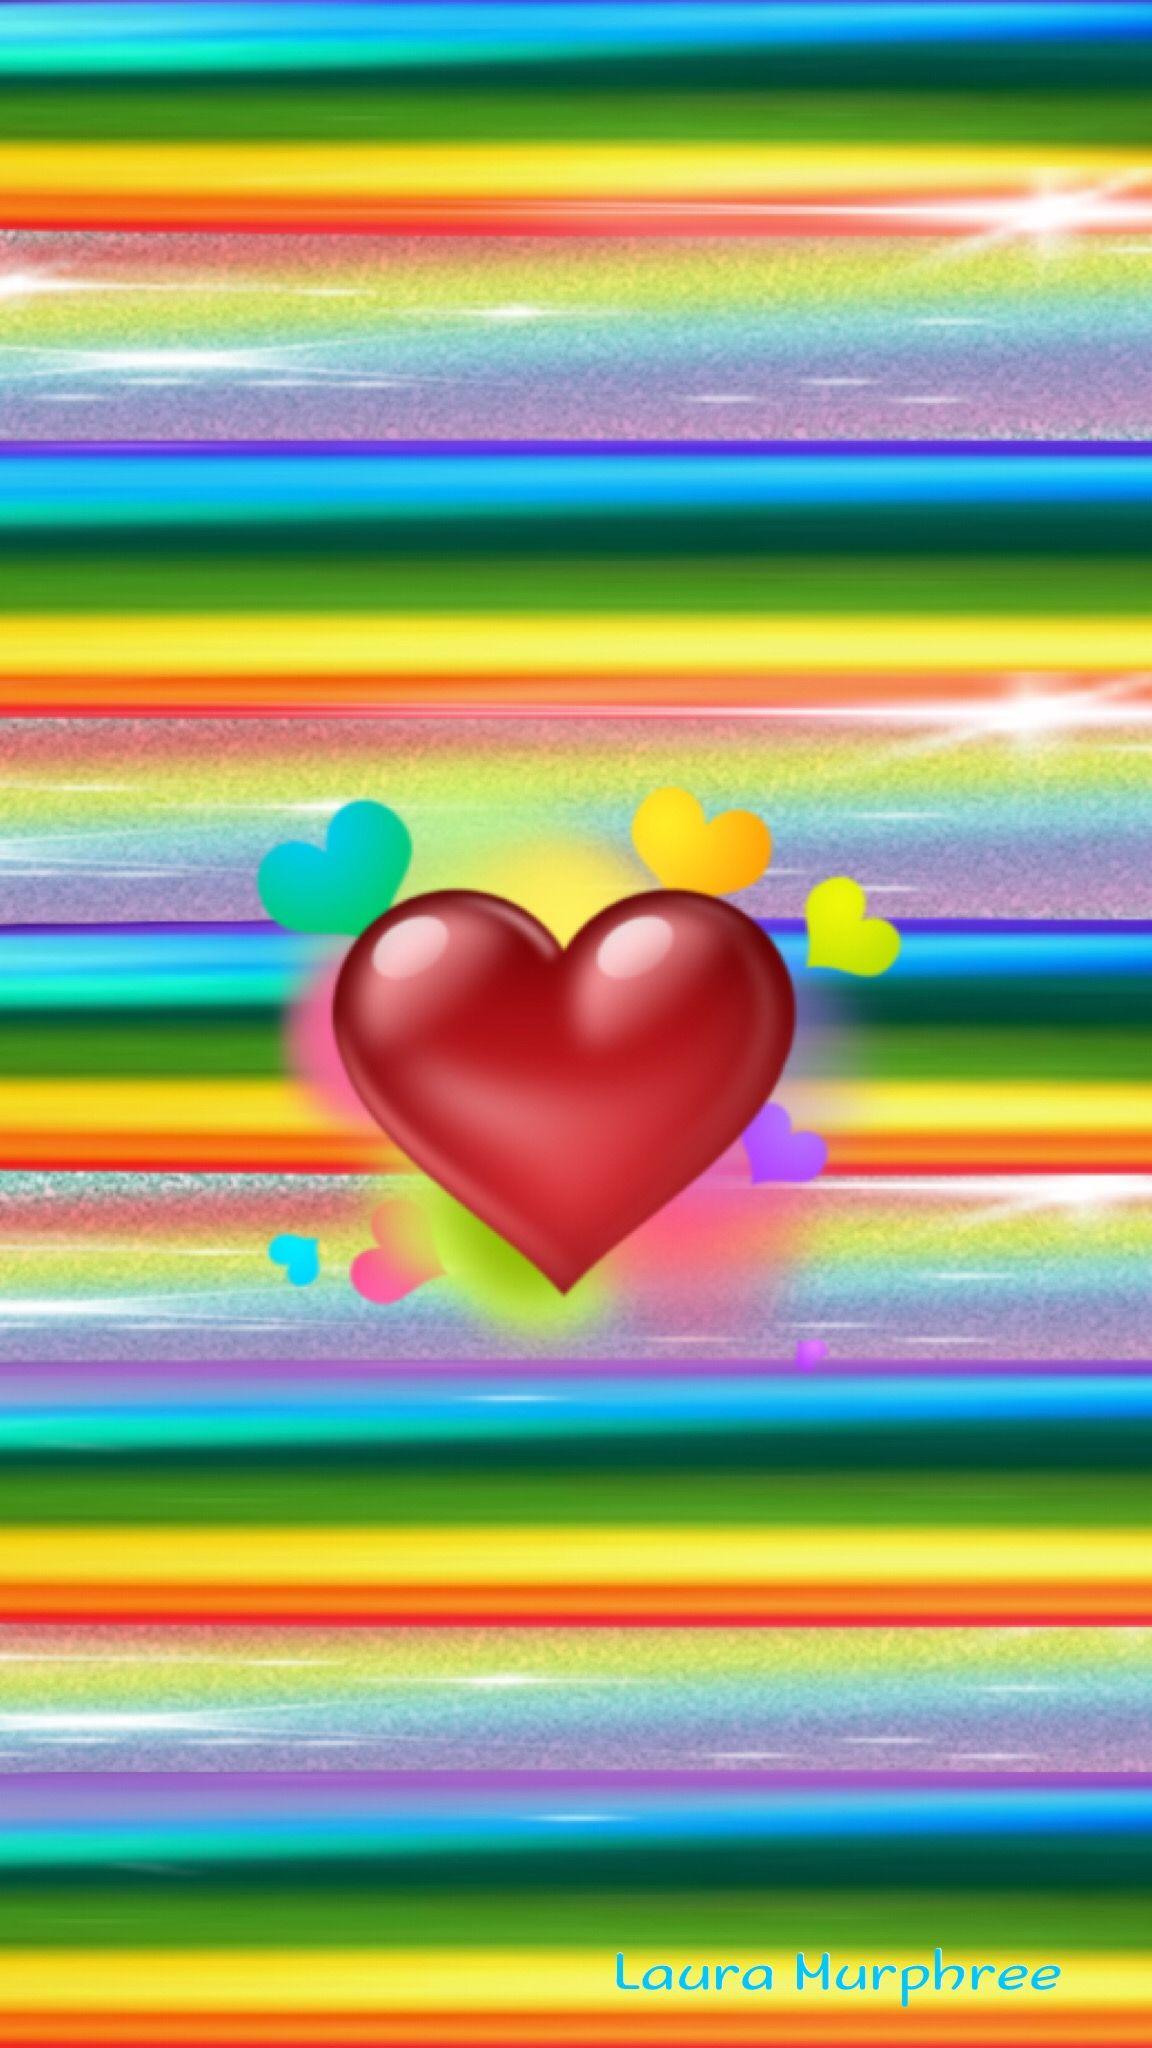 Rainbow heart phone wallpaper colorful background in 2020